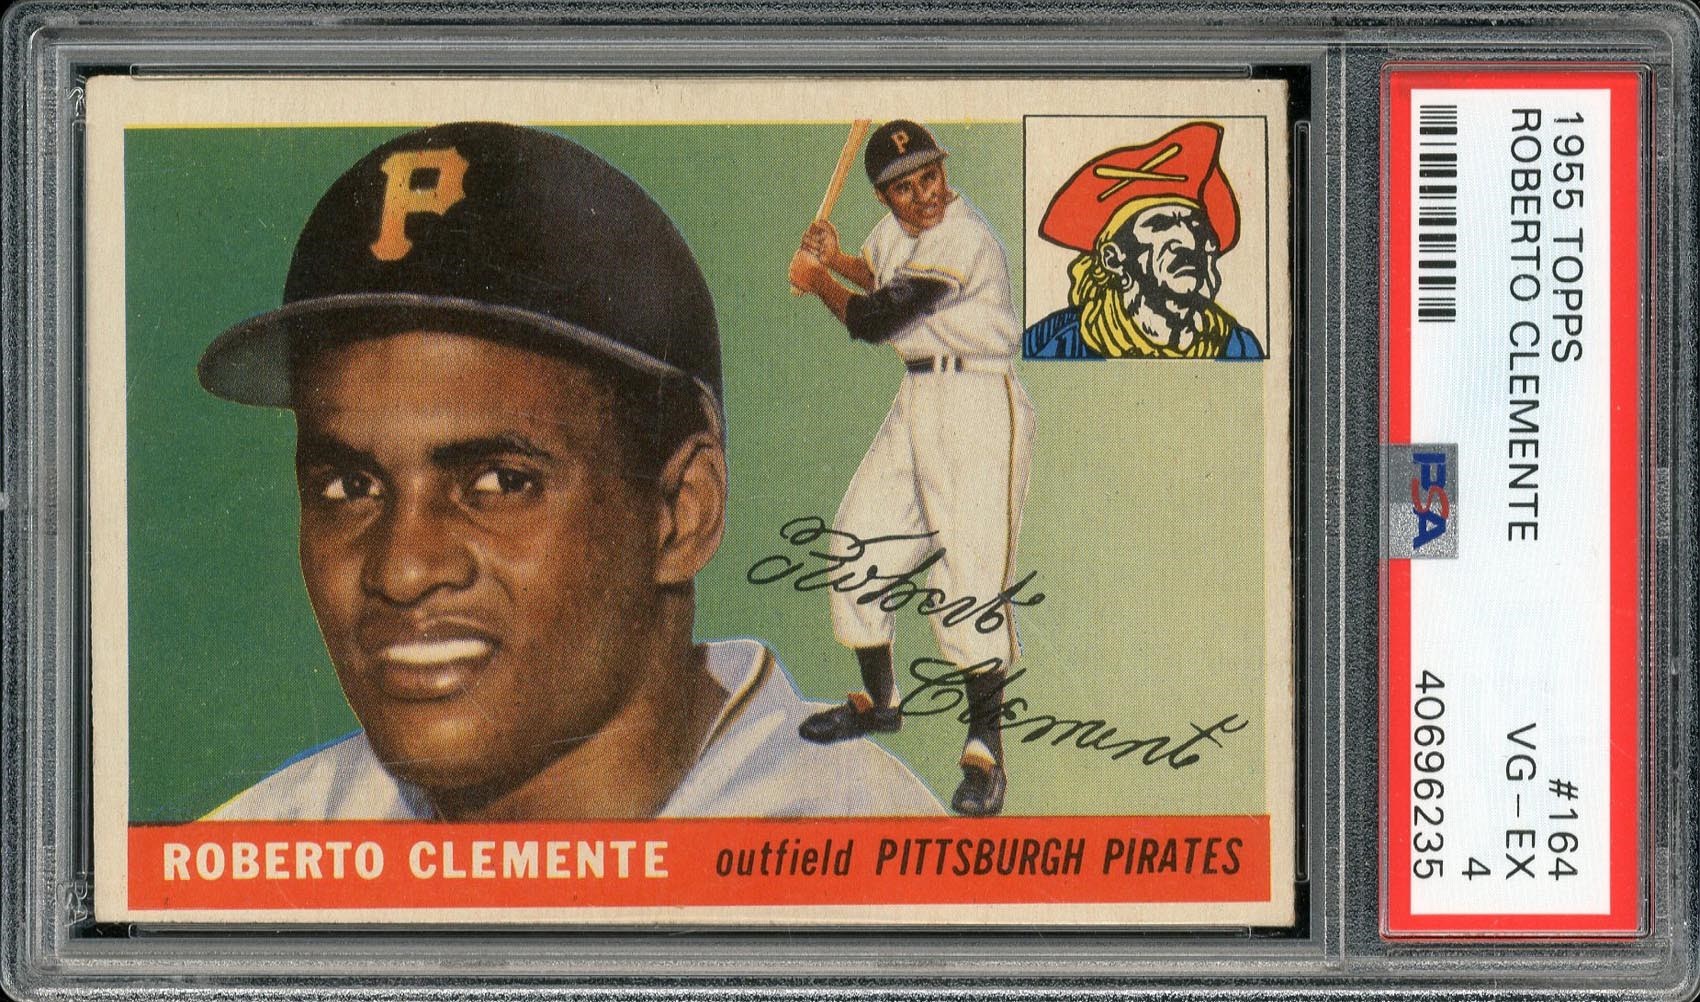 Baseball and Trading Cards - 1955 Topps #164 Roberto Clemente Rookie Card - PSA VG-EX+ 4.5